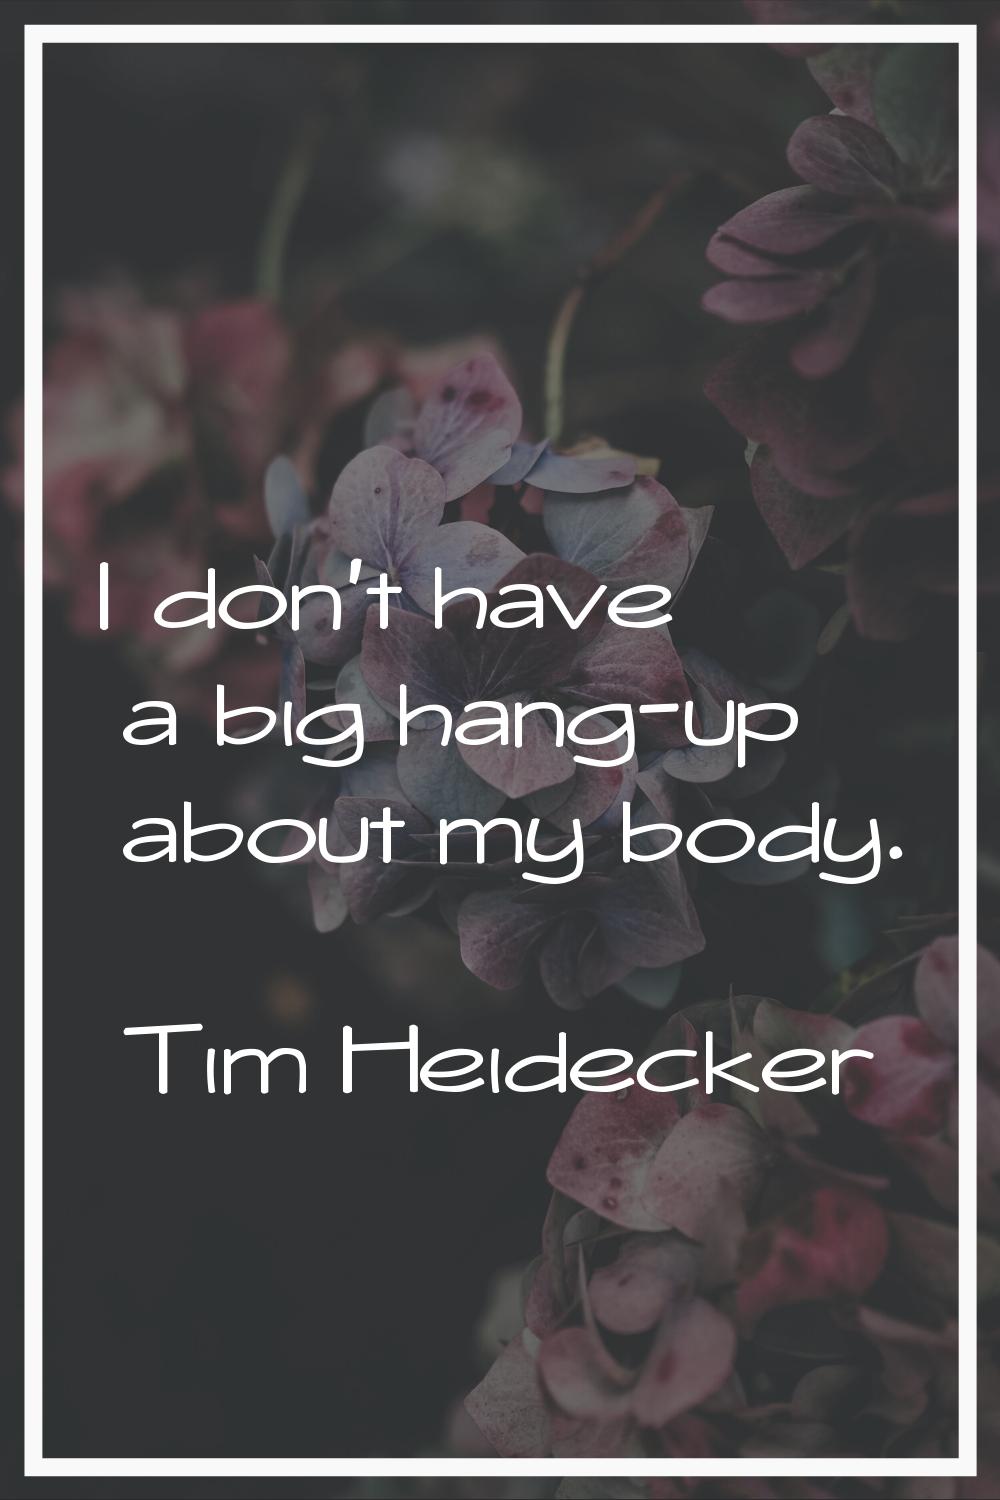 I don't have a big hang-up about my body.